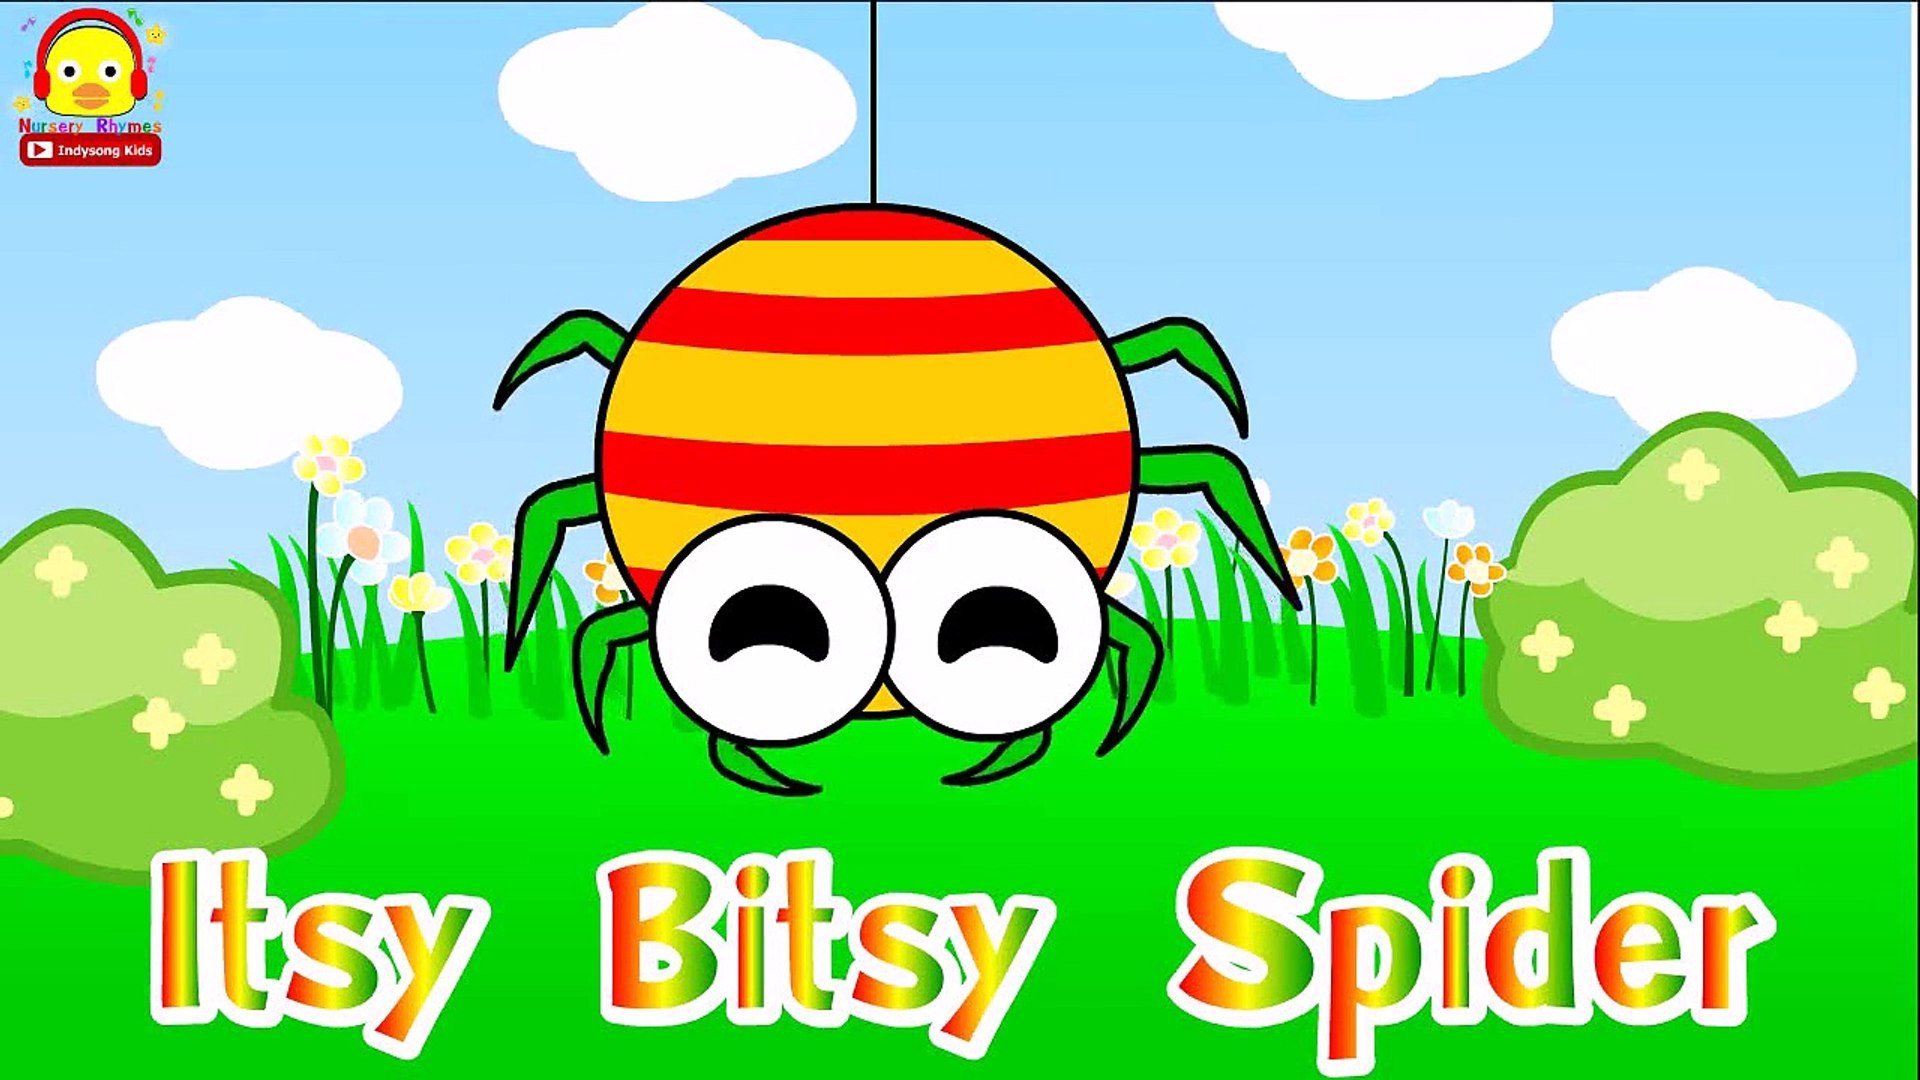 Itsy bitsy spider song ♫ Kids songs ♫ Nursery Rhymes Indy songs Kids - 動画 Dailymotion